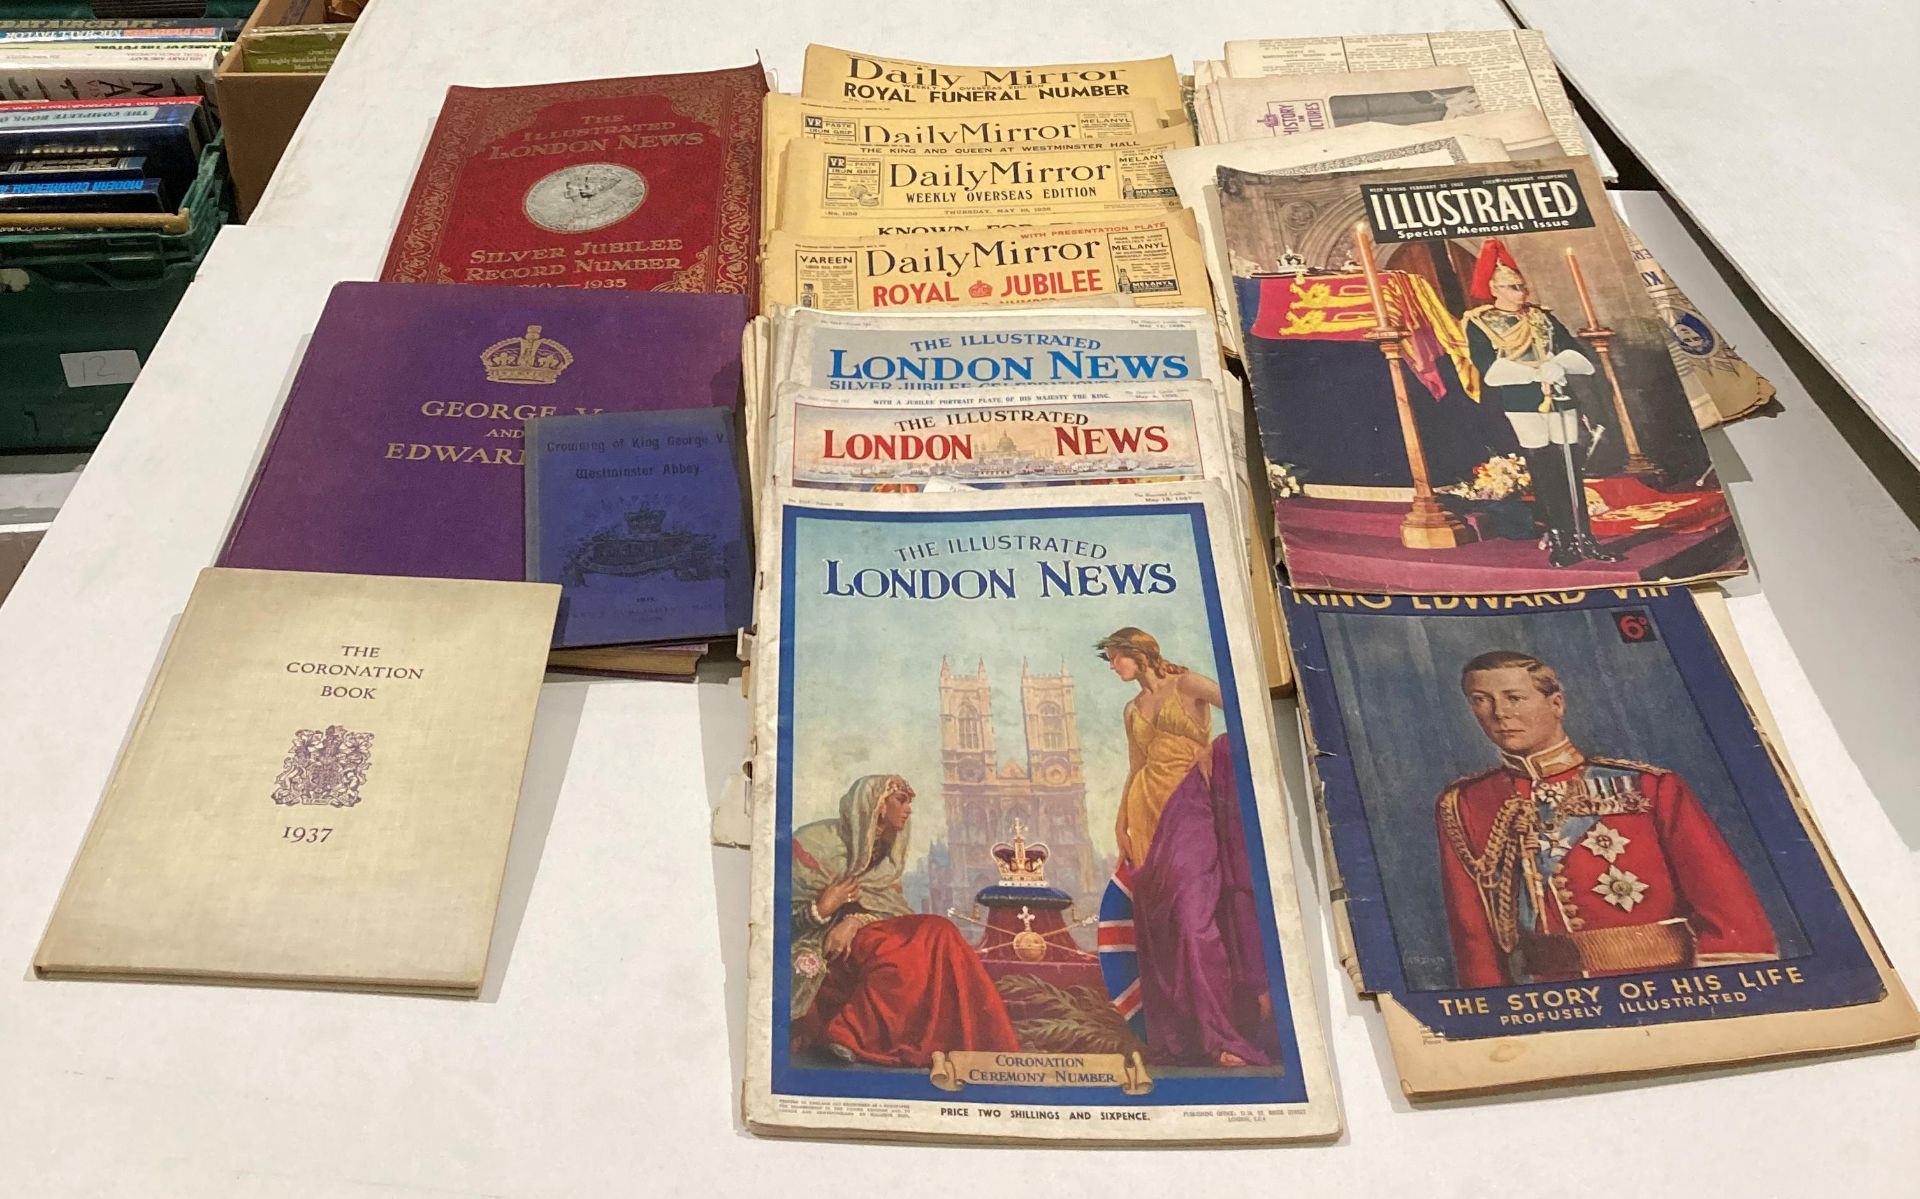 Contents to box - a collection of publications including The Illustrated London News,